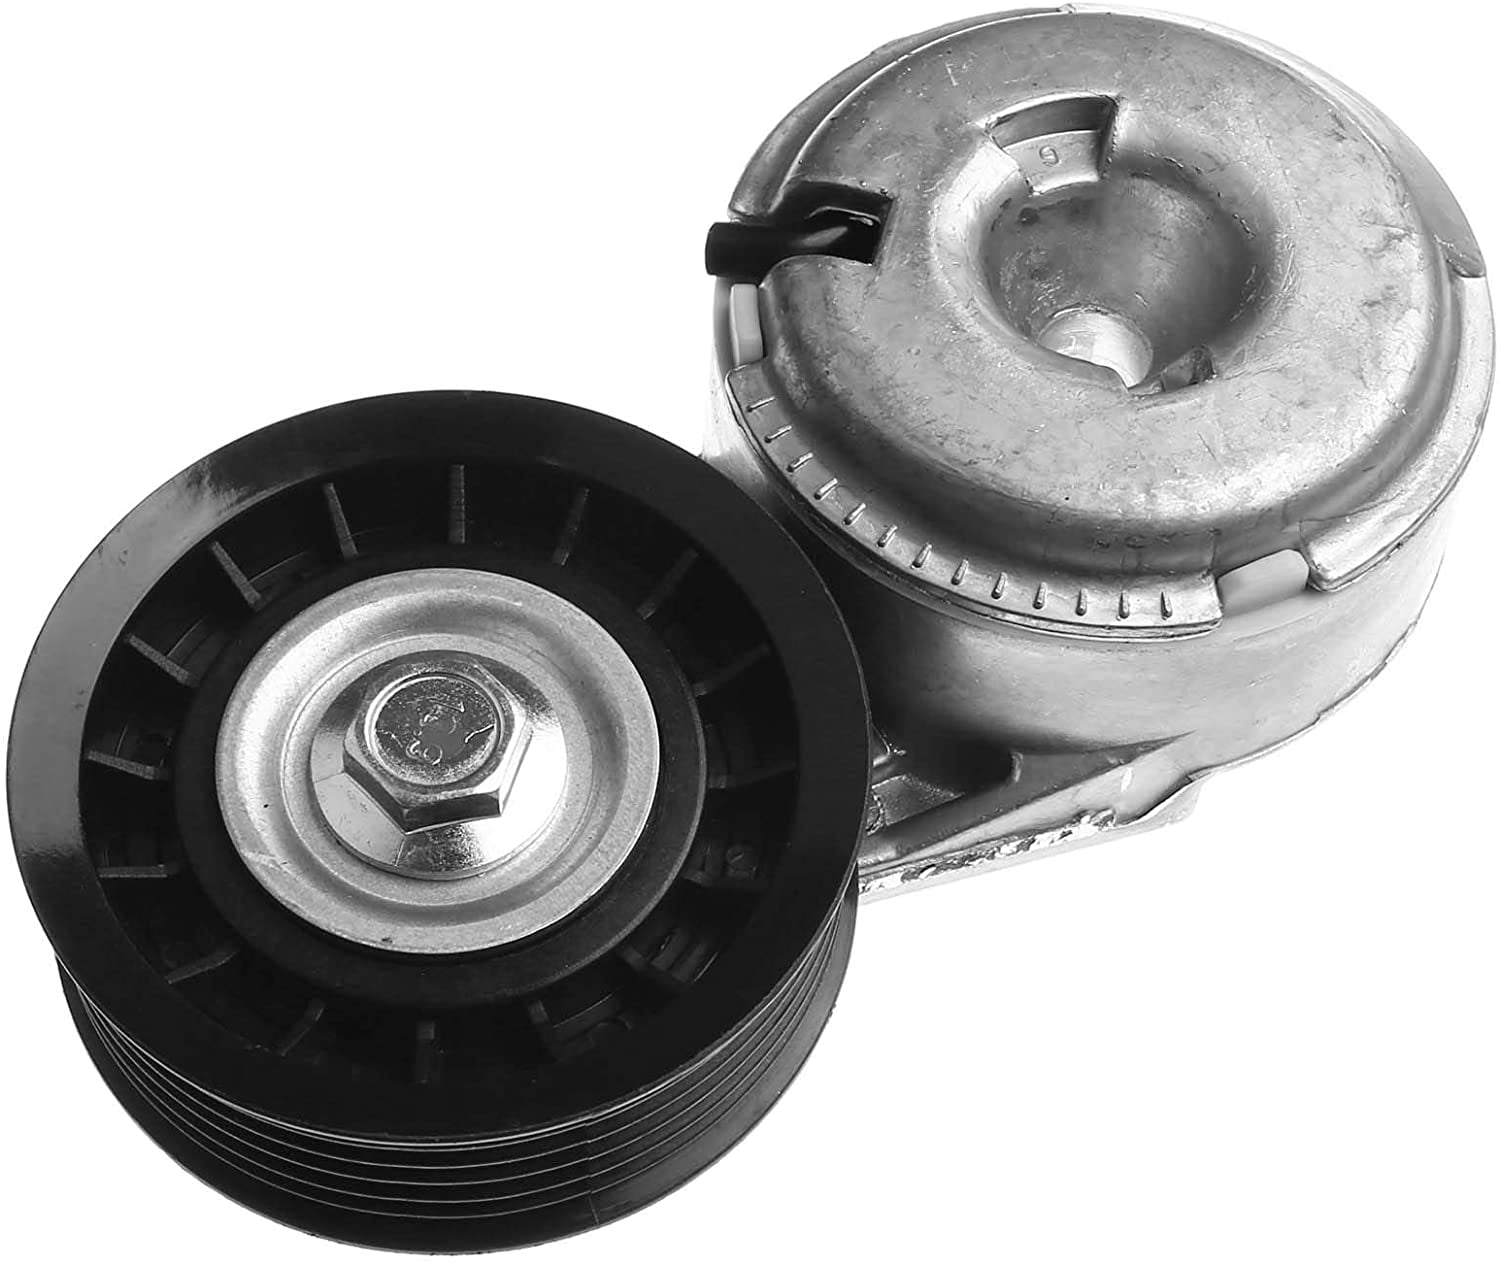 A-Premium Belt Tensioner Assembly Compatible with Ford Ranger Explorer 1993-2000 Aerostar 1996-1997 Mercury Mountaineer 1998-1999 V6 4.0L 